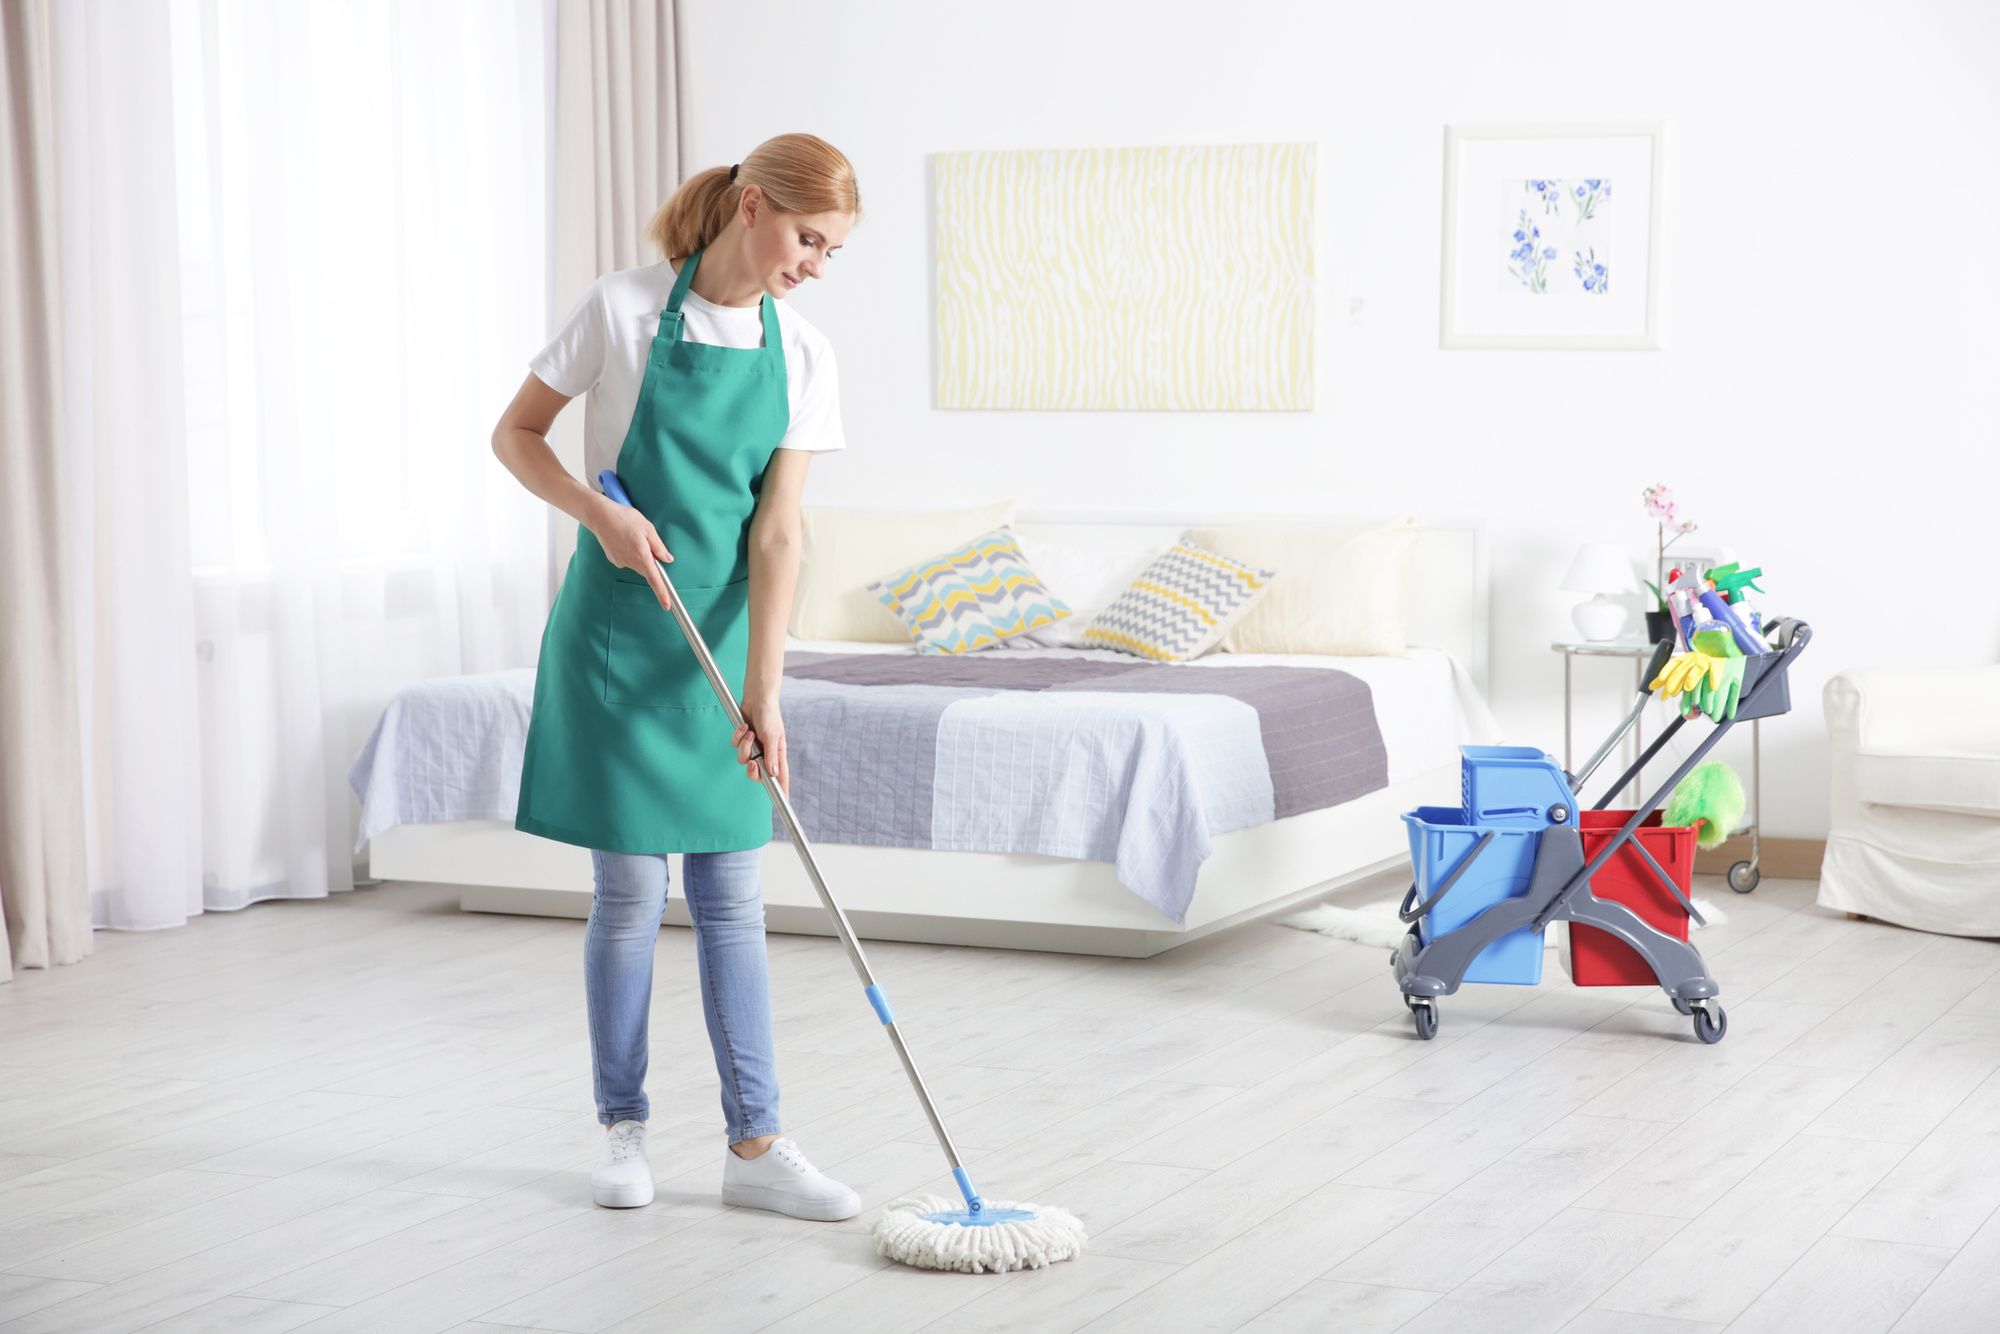 Vacating House Cleaning: Do Tenants Have to Clean Outside Windows